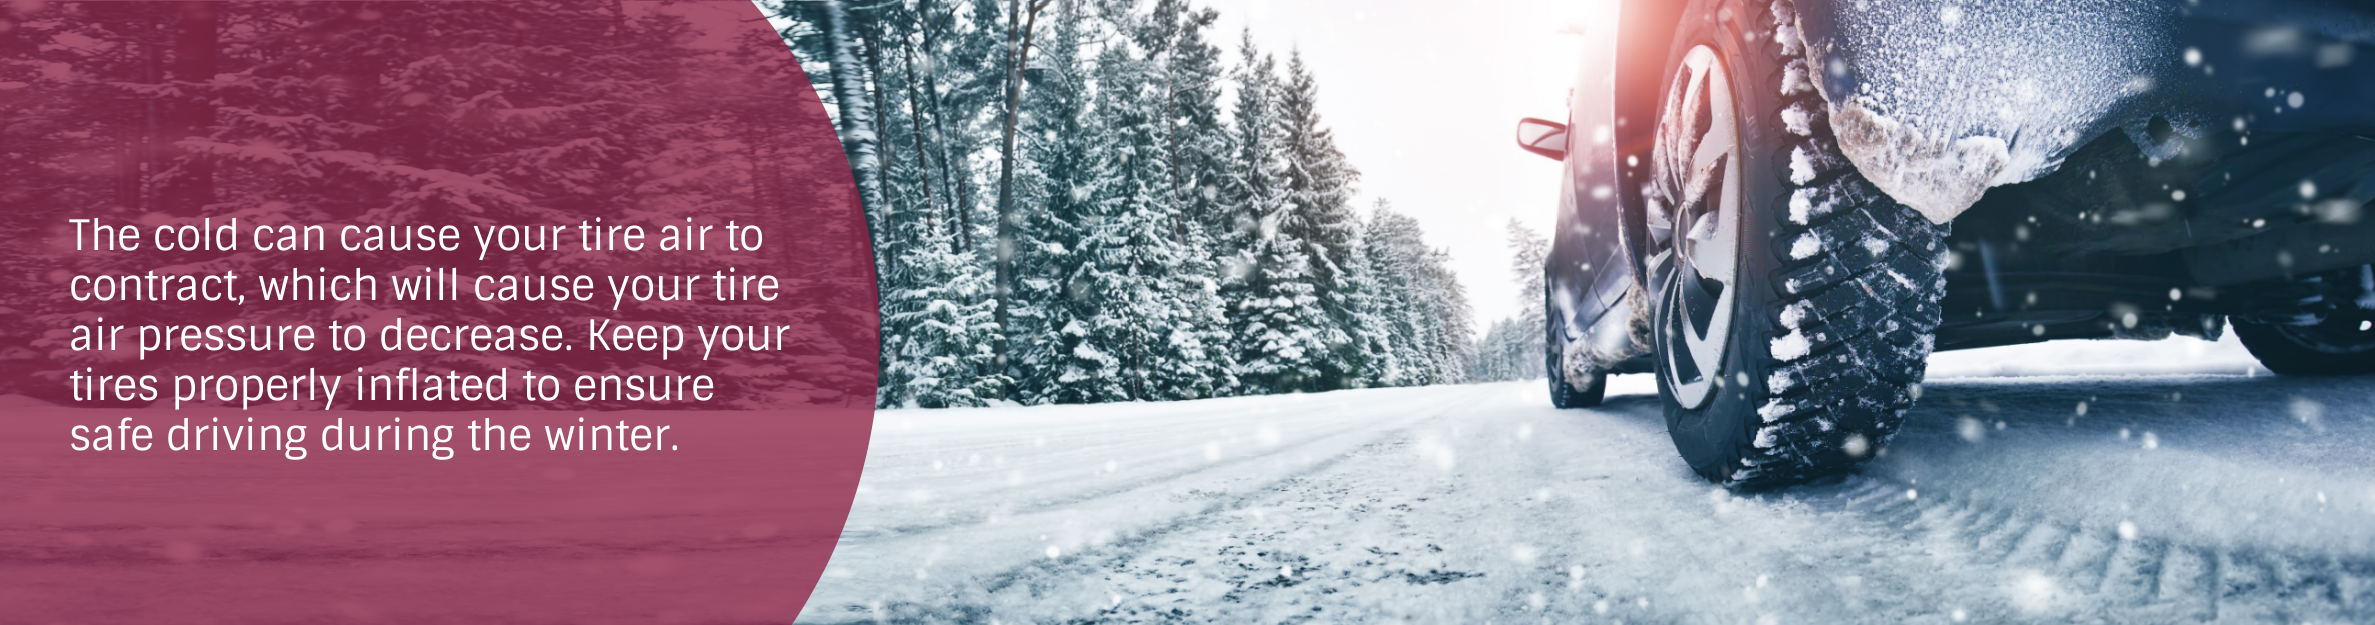 Photo: Car on a snowy road
Text: The cold can cause your tire air to contract, which will cause your tire air pressure to decrease. Keep your tires properly inflated to ensure safe driving during the winter.